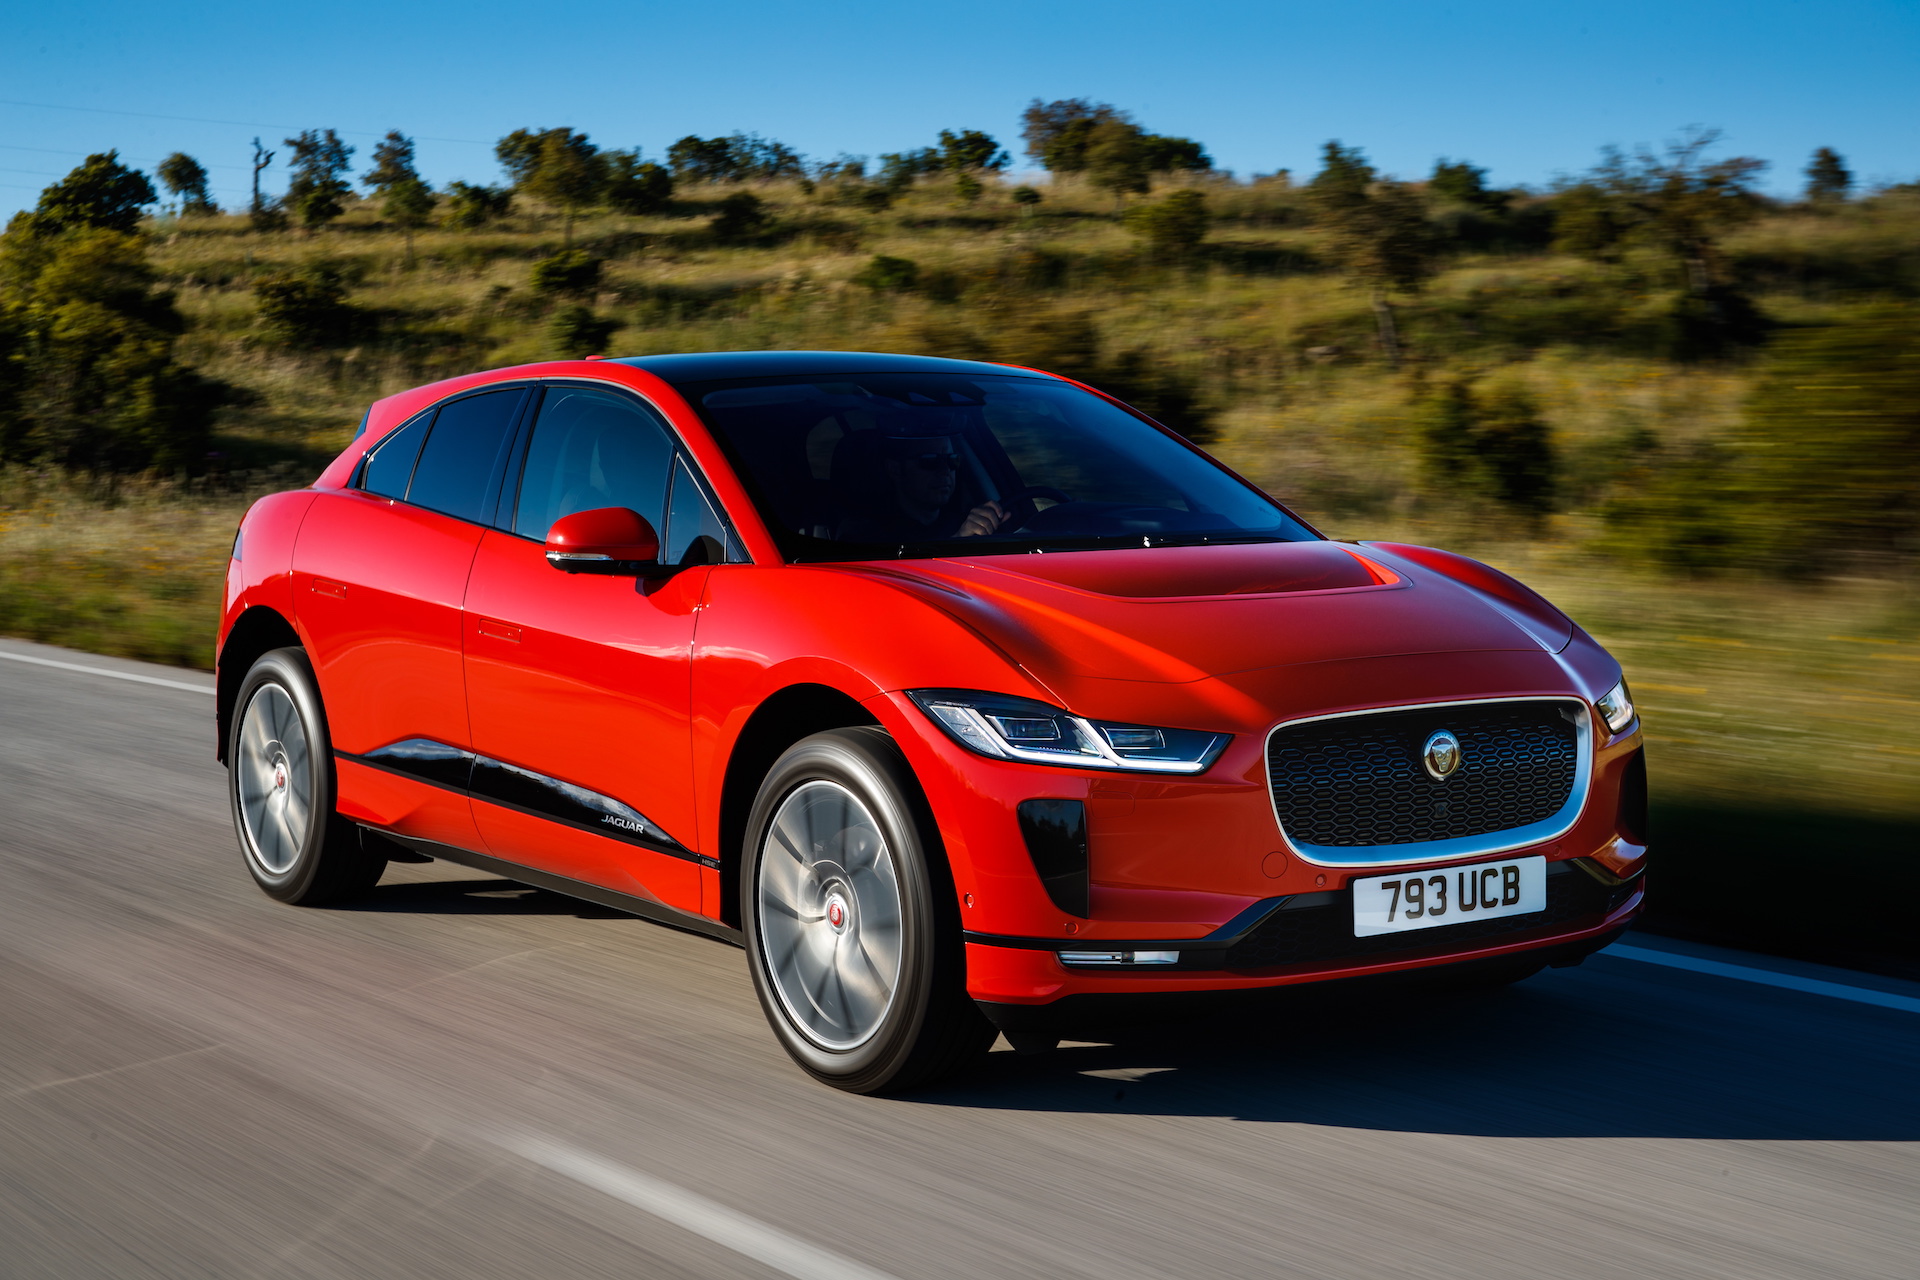 2019 Jaguar IPace realworld review 3 days with the sexy electric